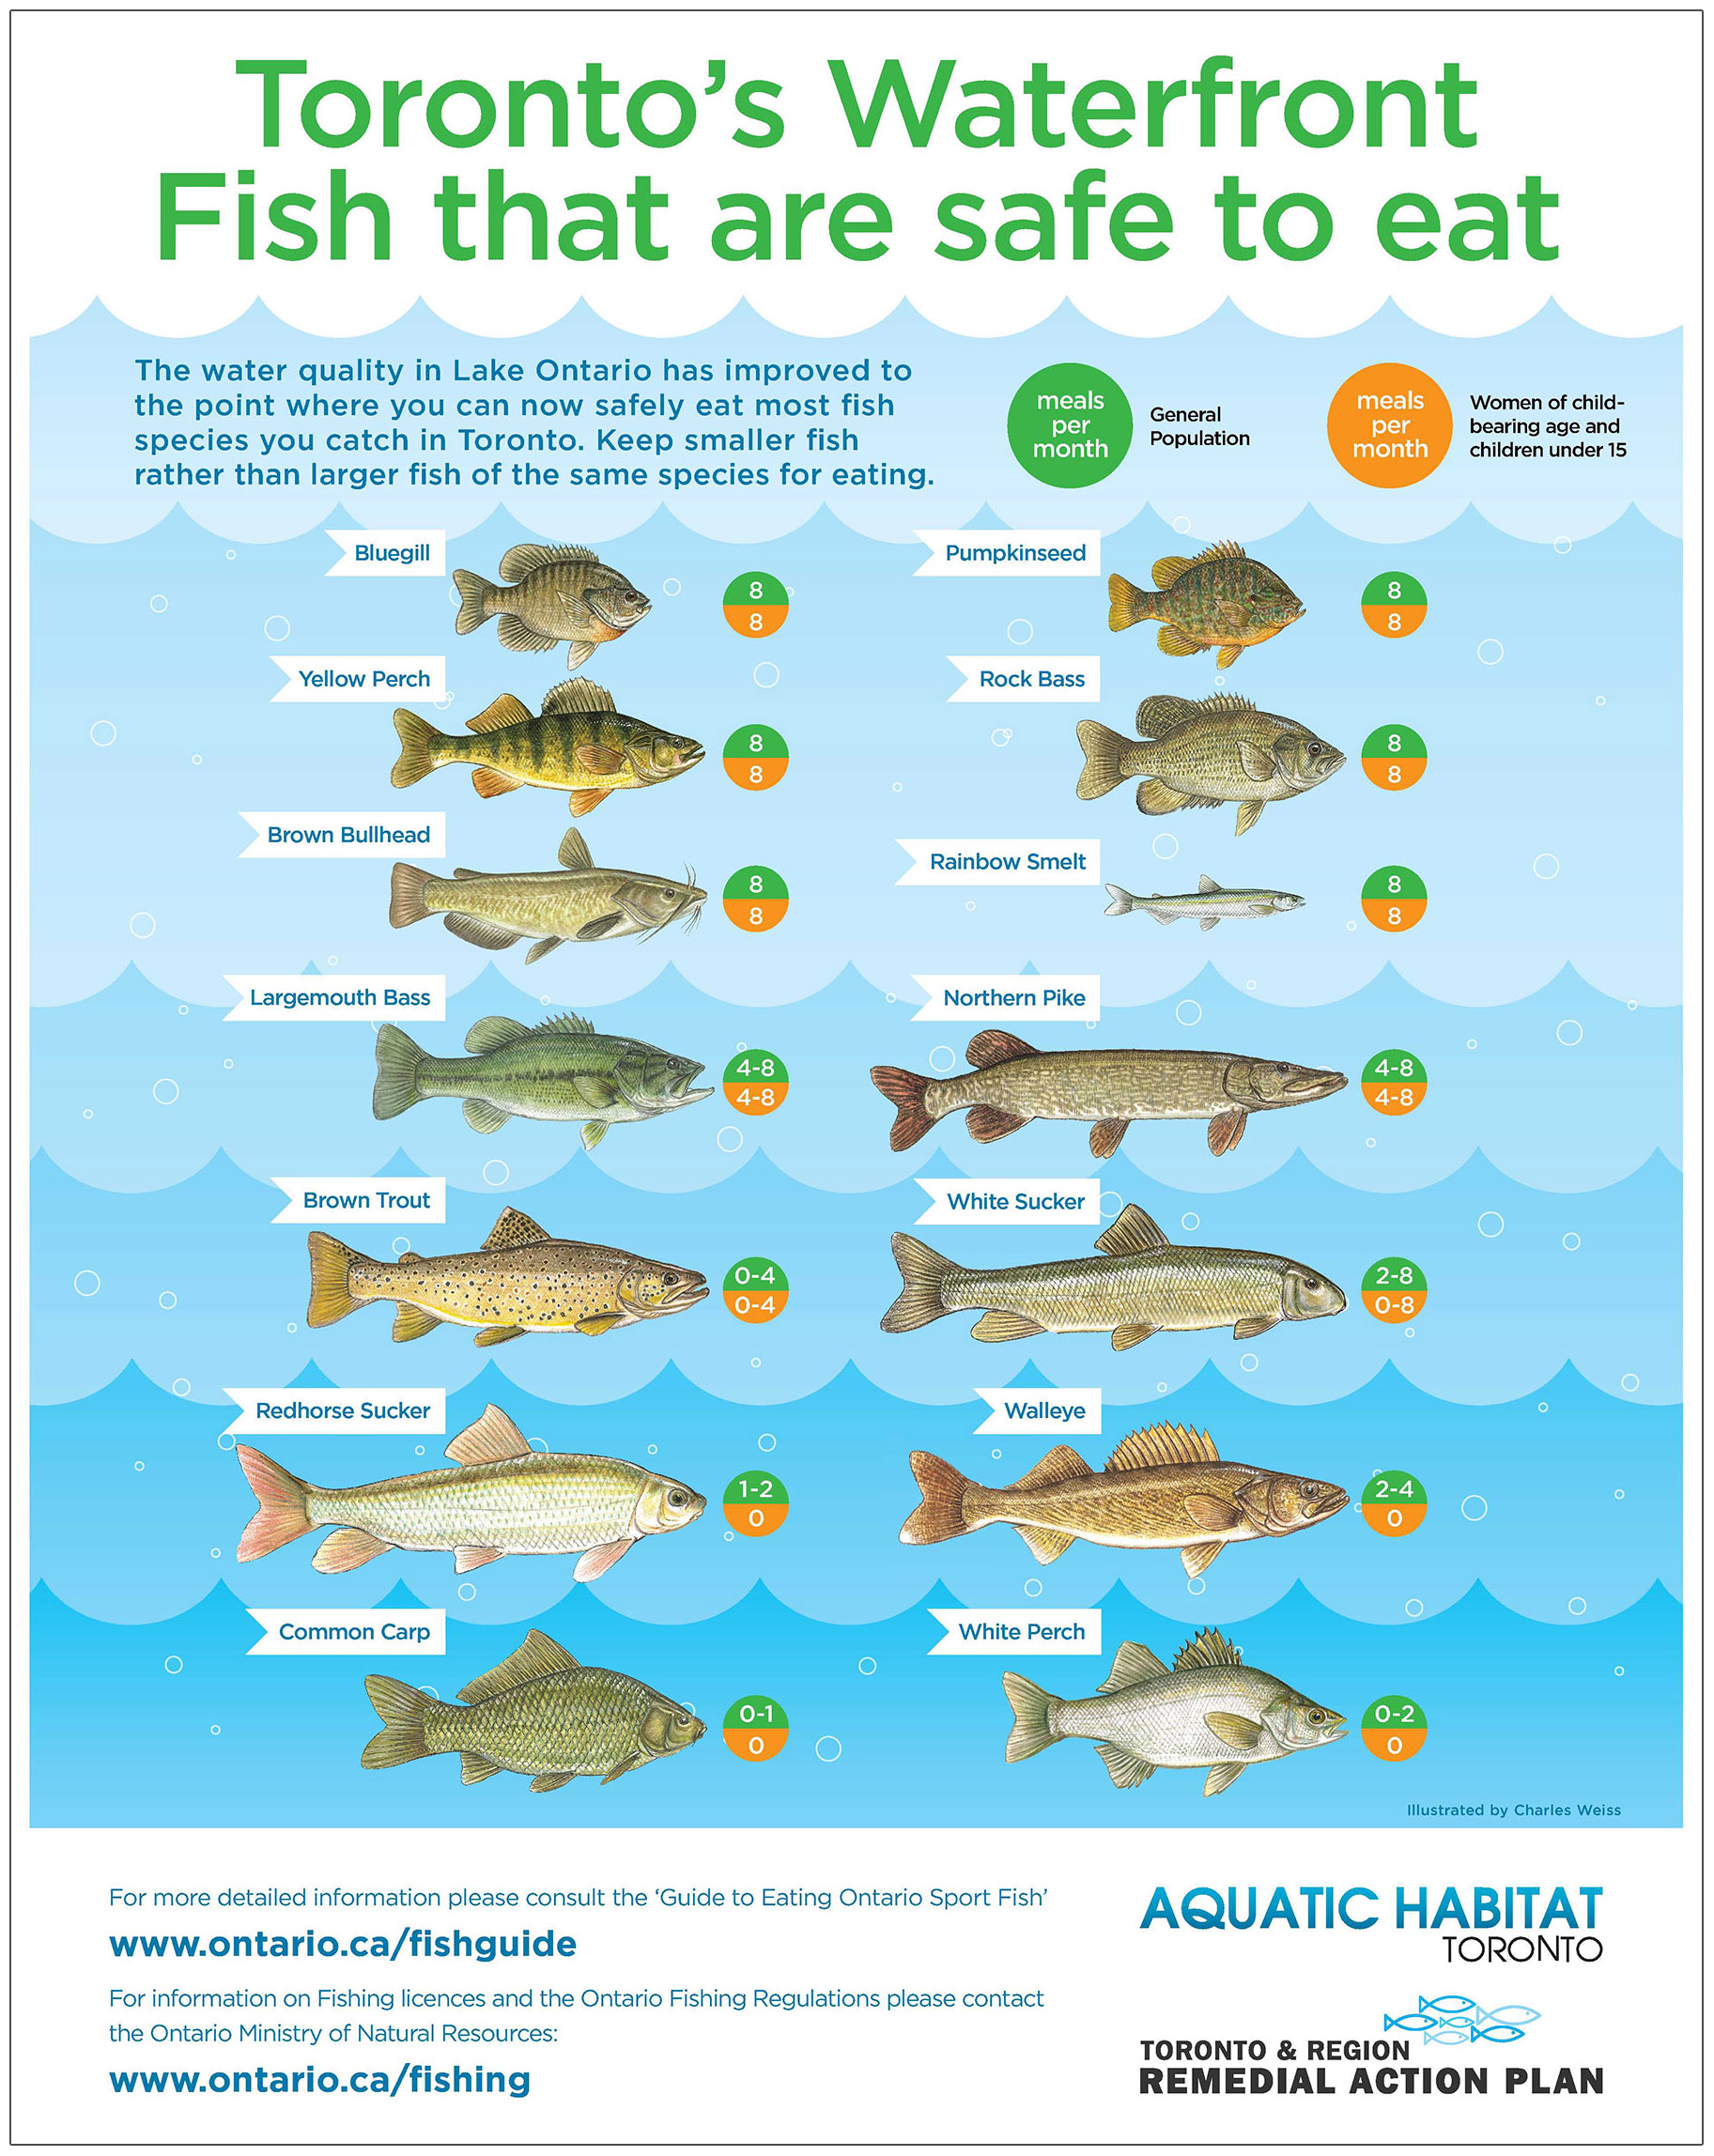 guide to fish from the Toronto waterfront that are safe to eat